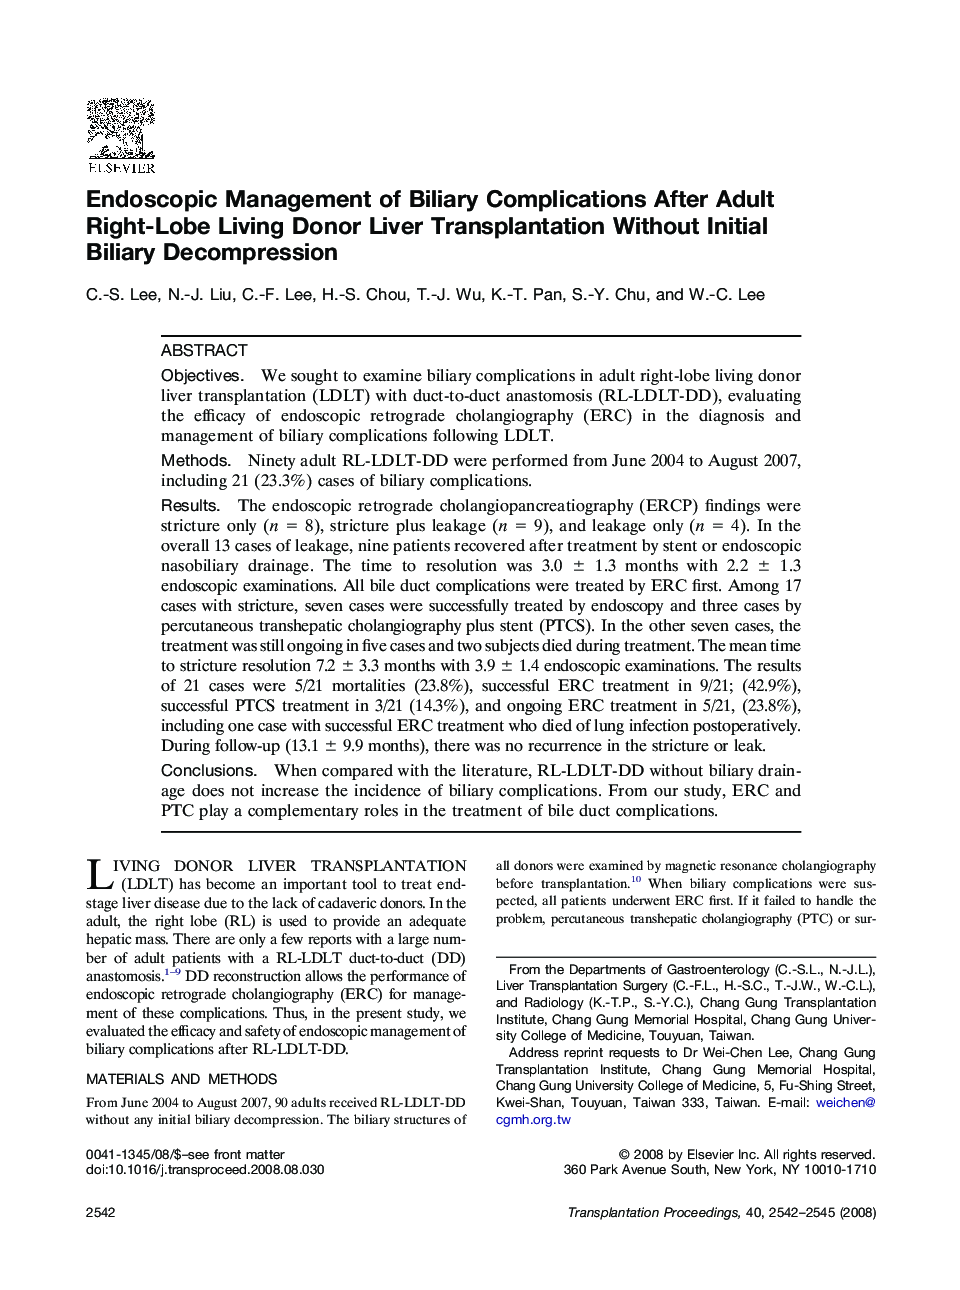 Endoscopic Management of Biliary Complications After Adult Right-Lobe Living Donor Liver Transplantation Without Initial Biliary Decompression